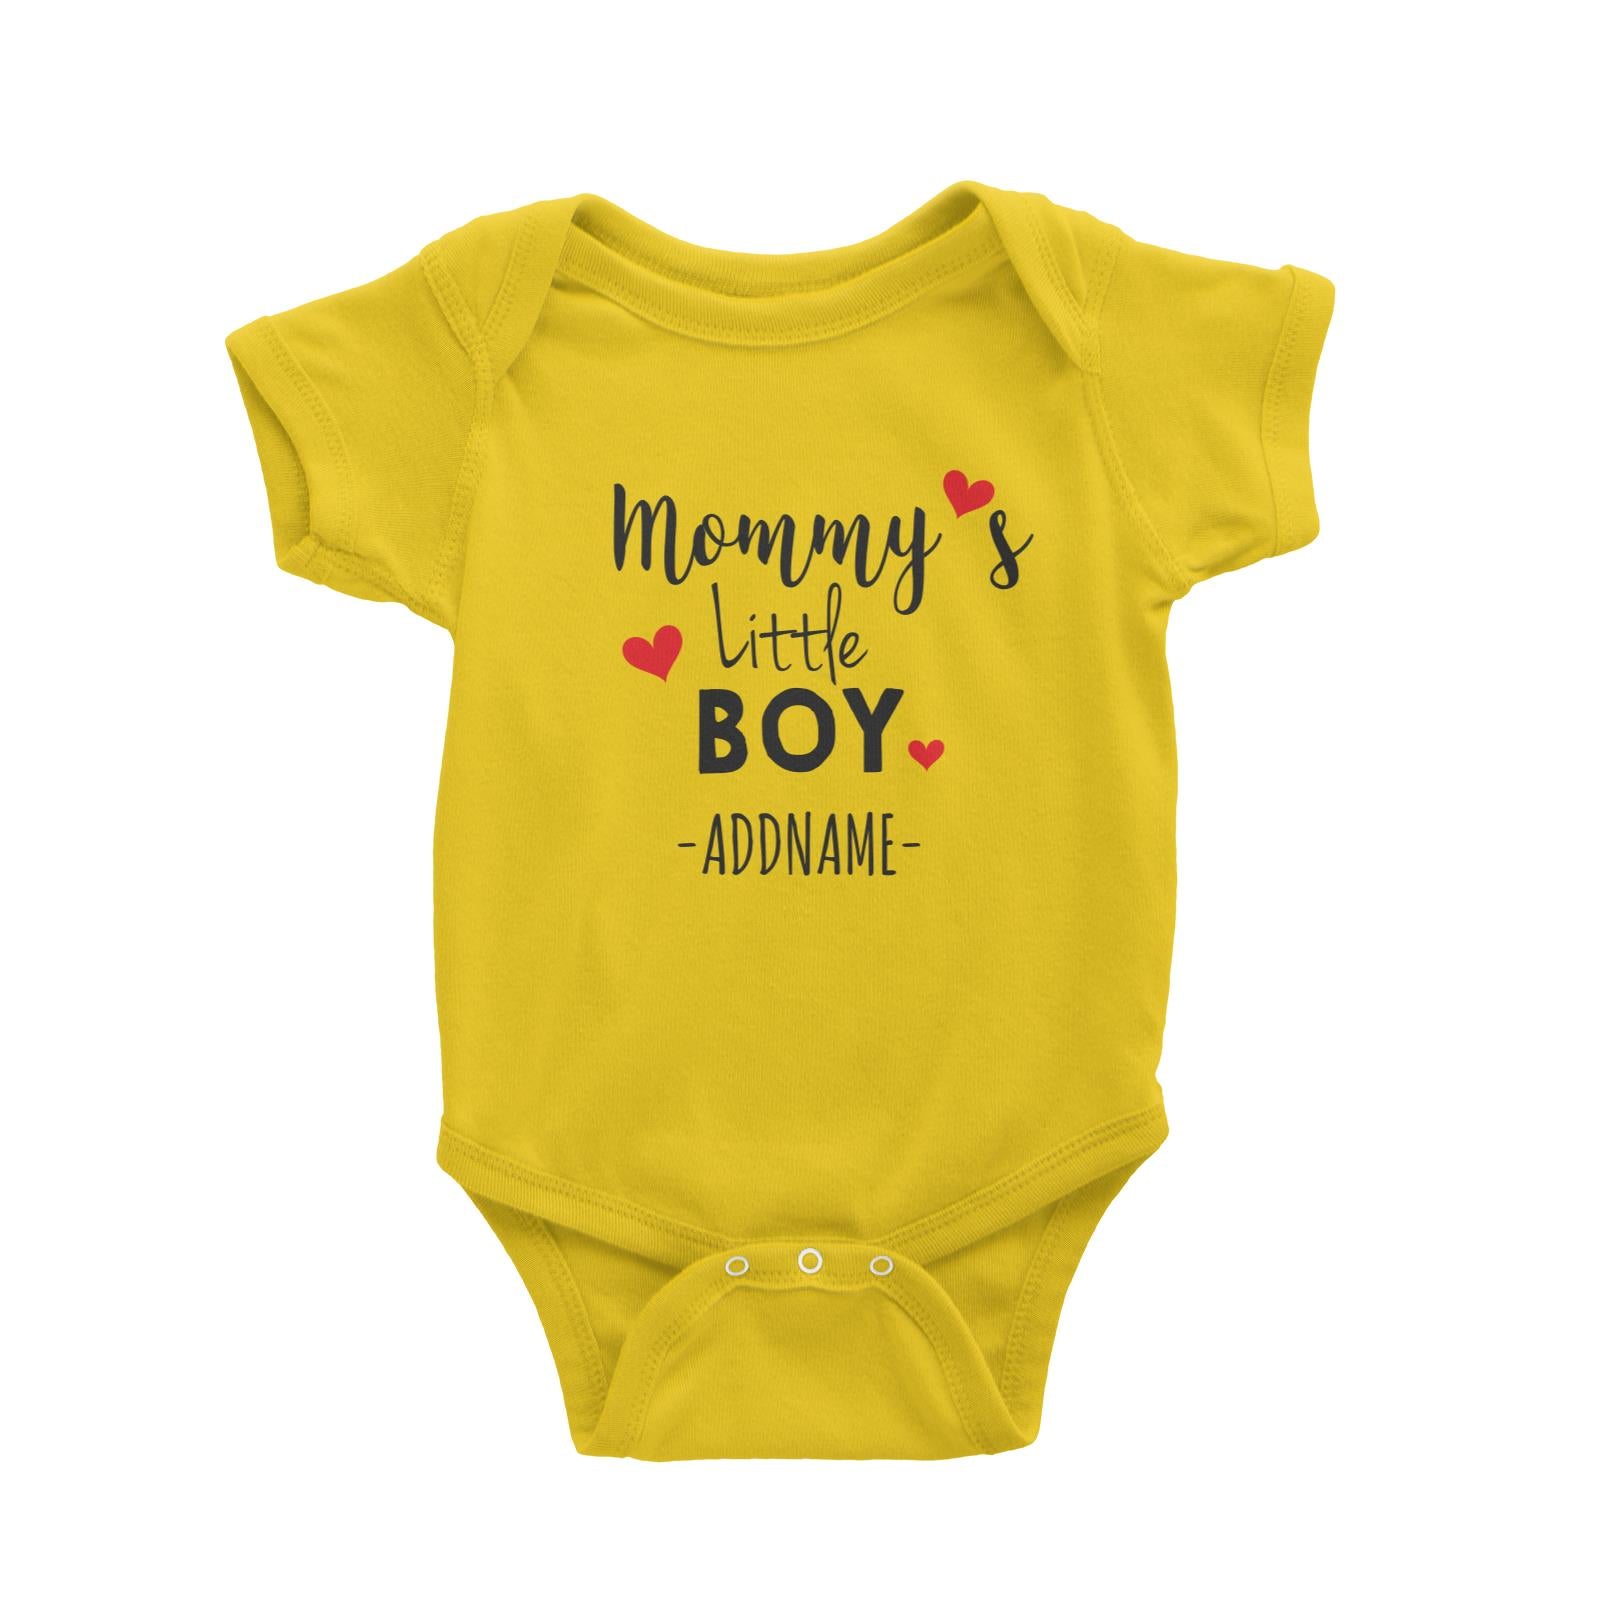 Mommy's Little Boy Addname Baby Romper Personalizable Designs Basic Newborn